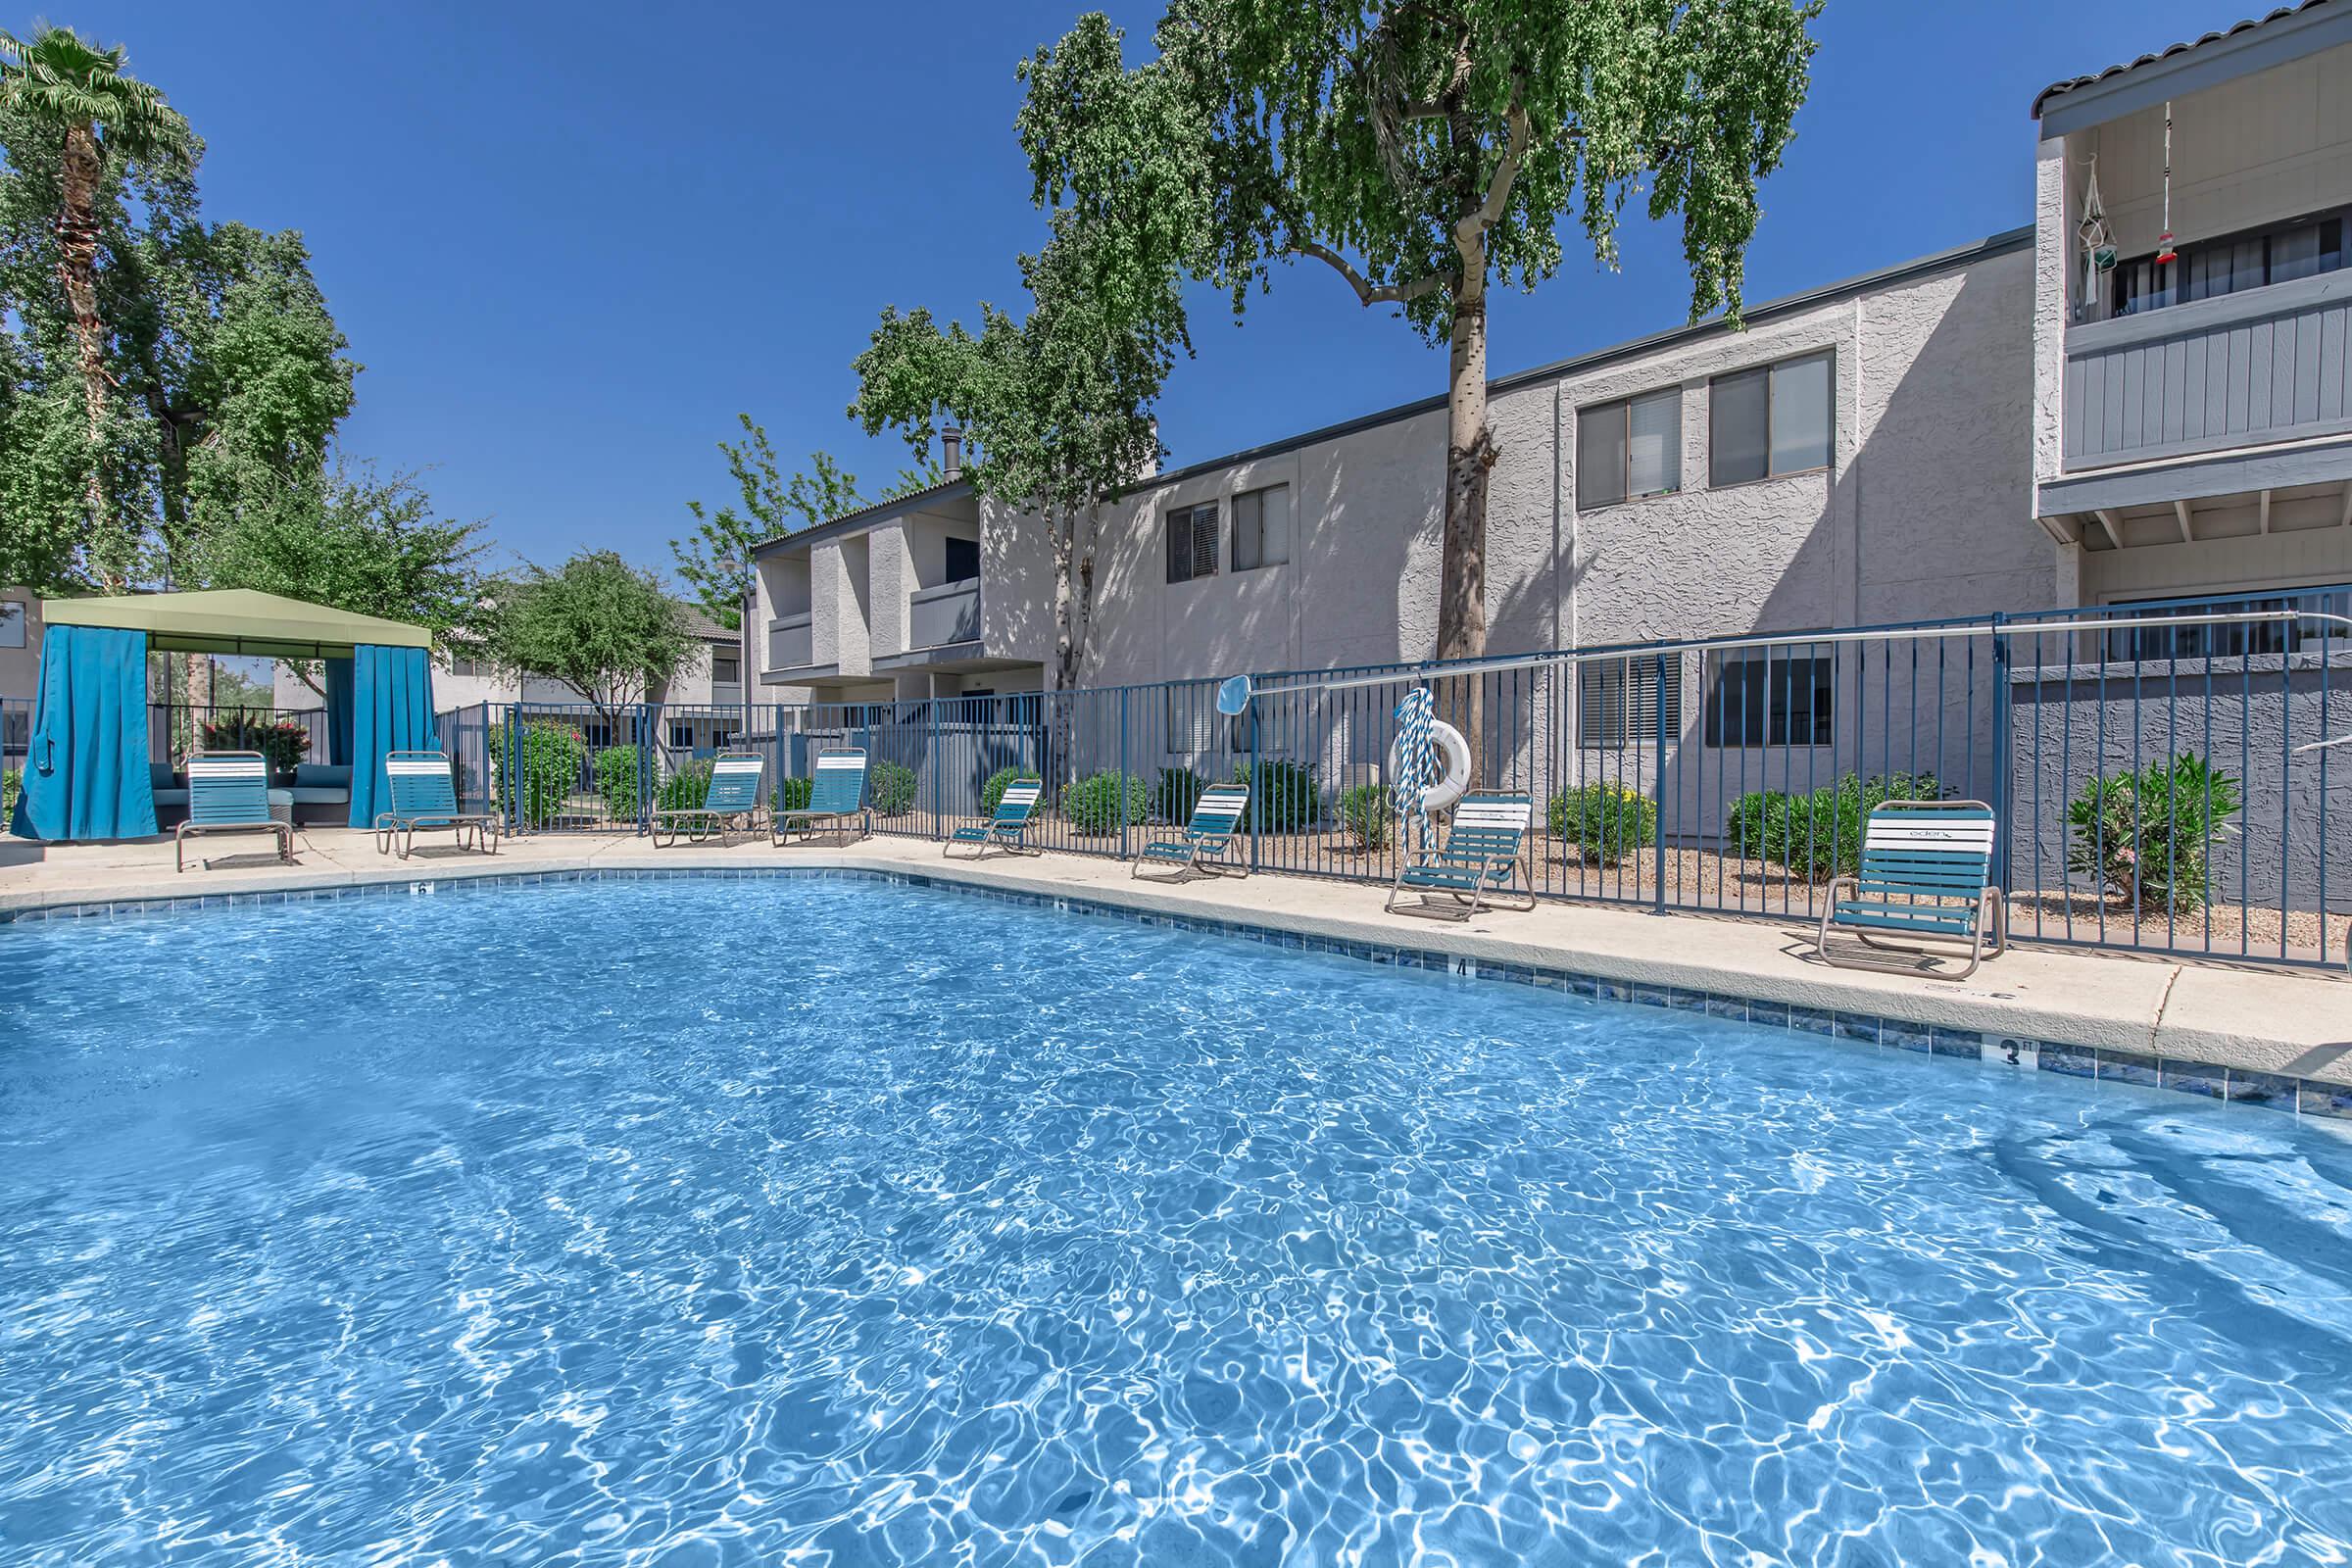 A large dazzling pool surrounded by the apartments at Rise on McClintock.